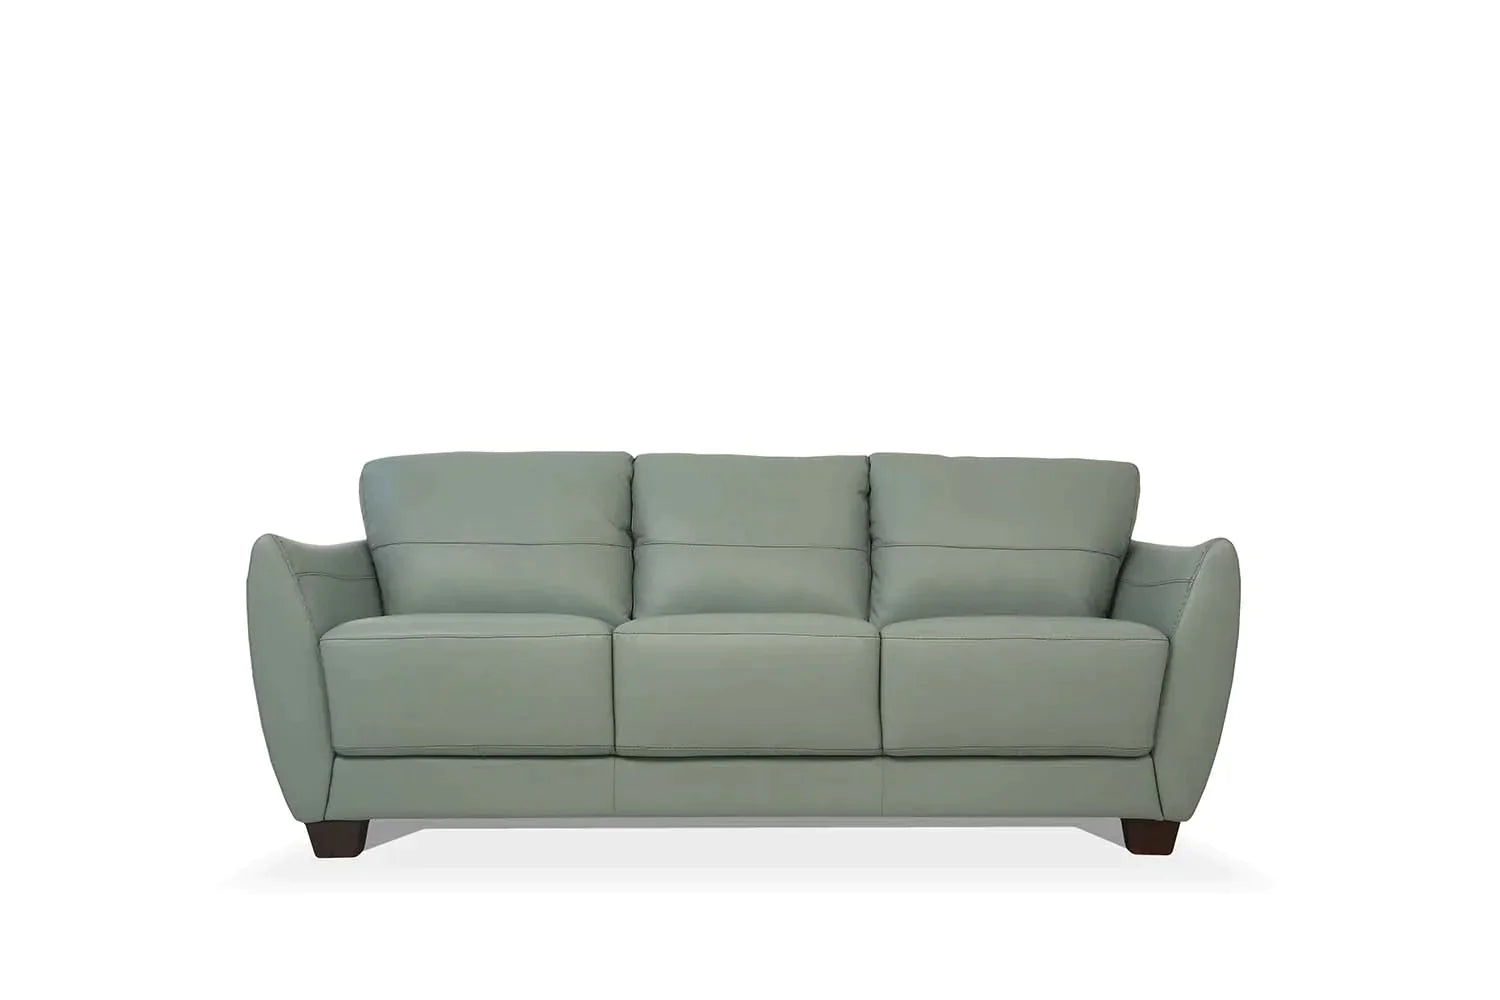 Valeria Watery Leather Sofa Model 54950 By ACME Furniture